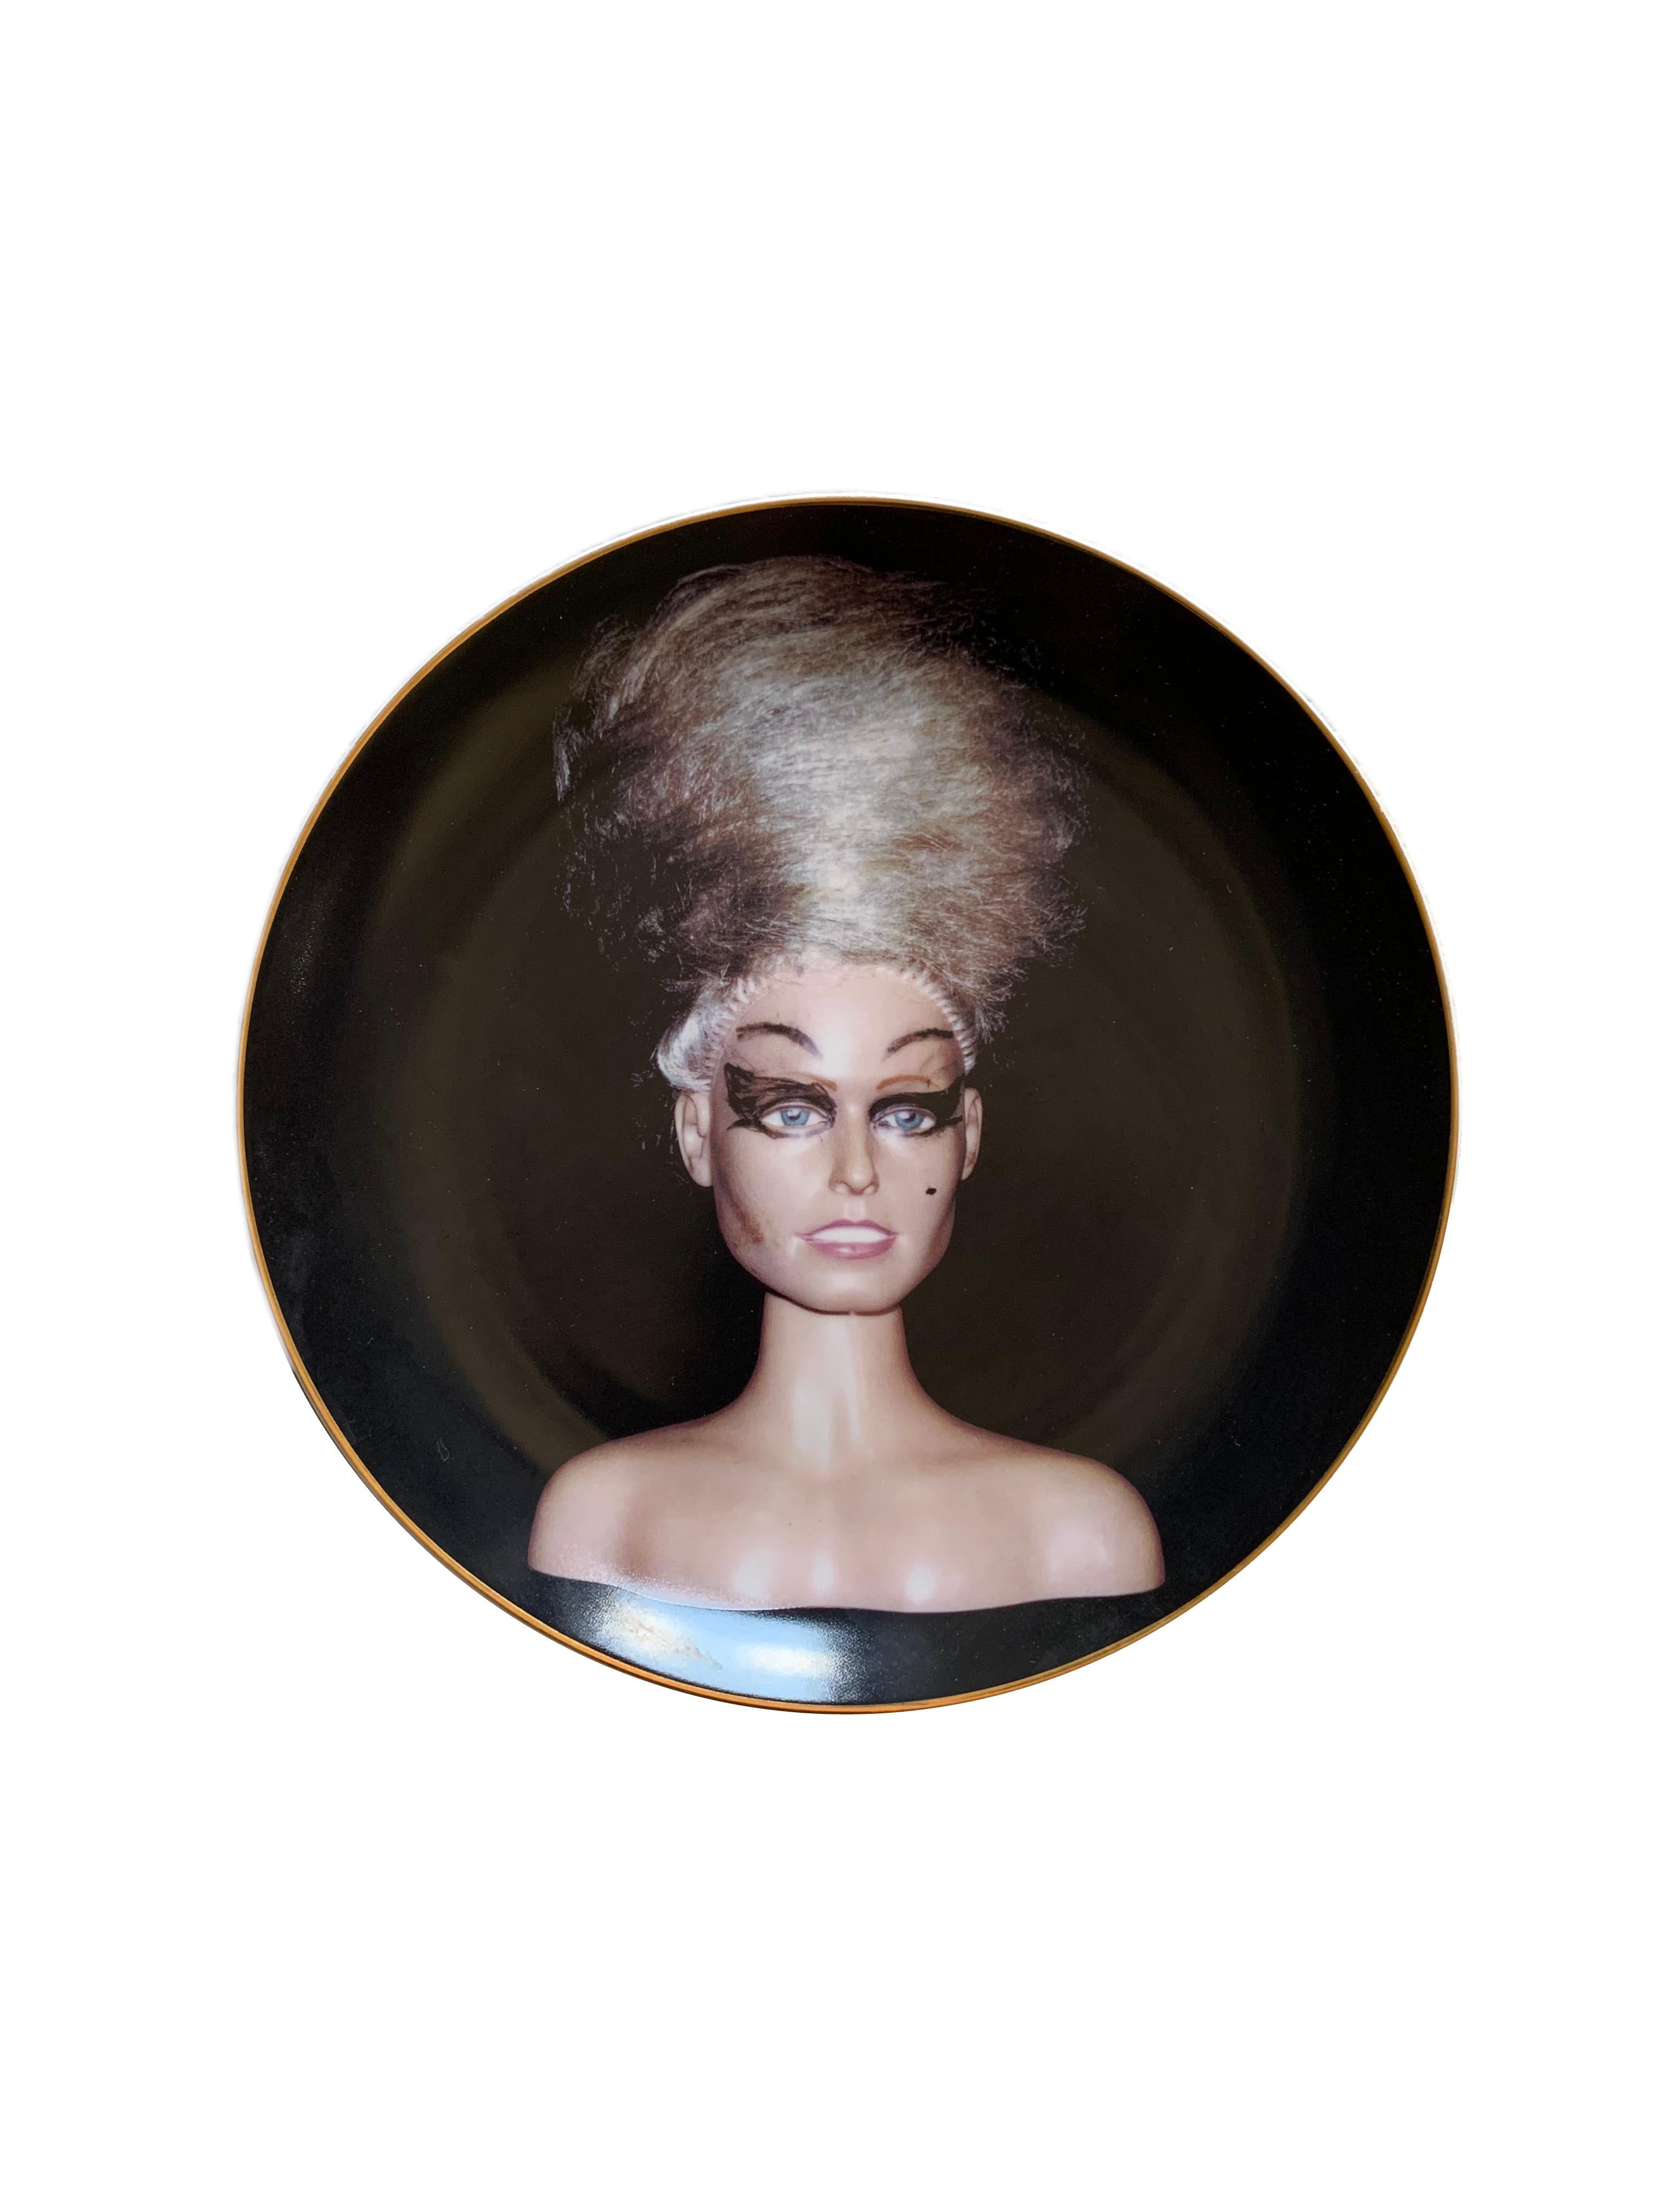 American 'The Girls’ Set of 3 Plates by John Waters, Limited Edition Set of 300 